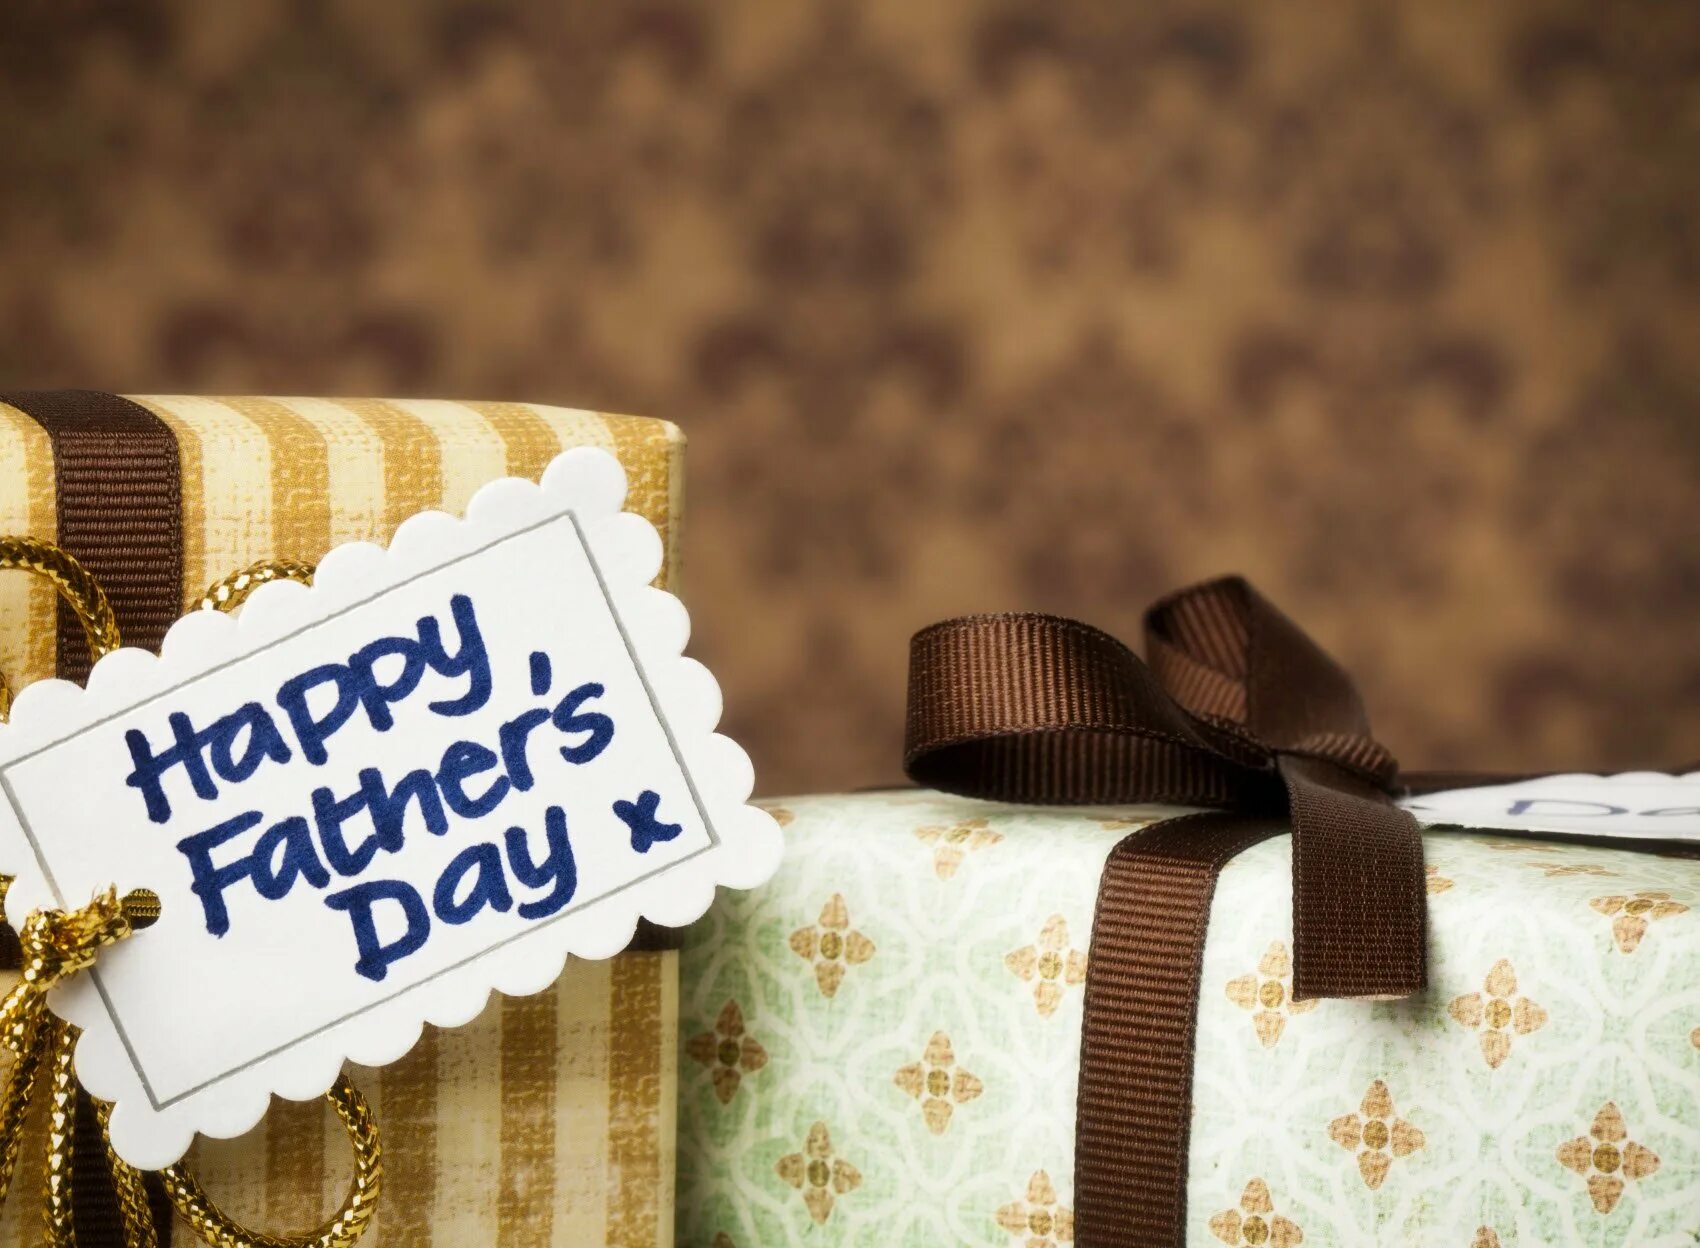 Fathers day. Father s Day. Fathers Day картинки. Happy father's Day. Happy father's Day картинки.